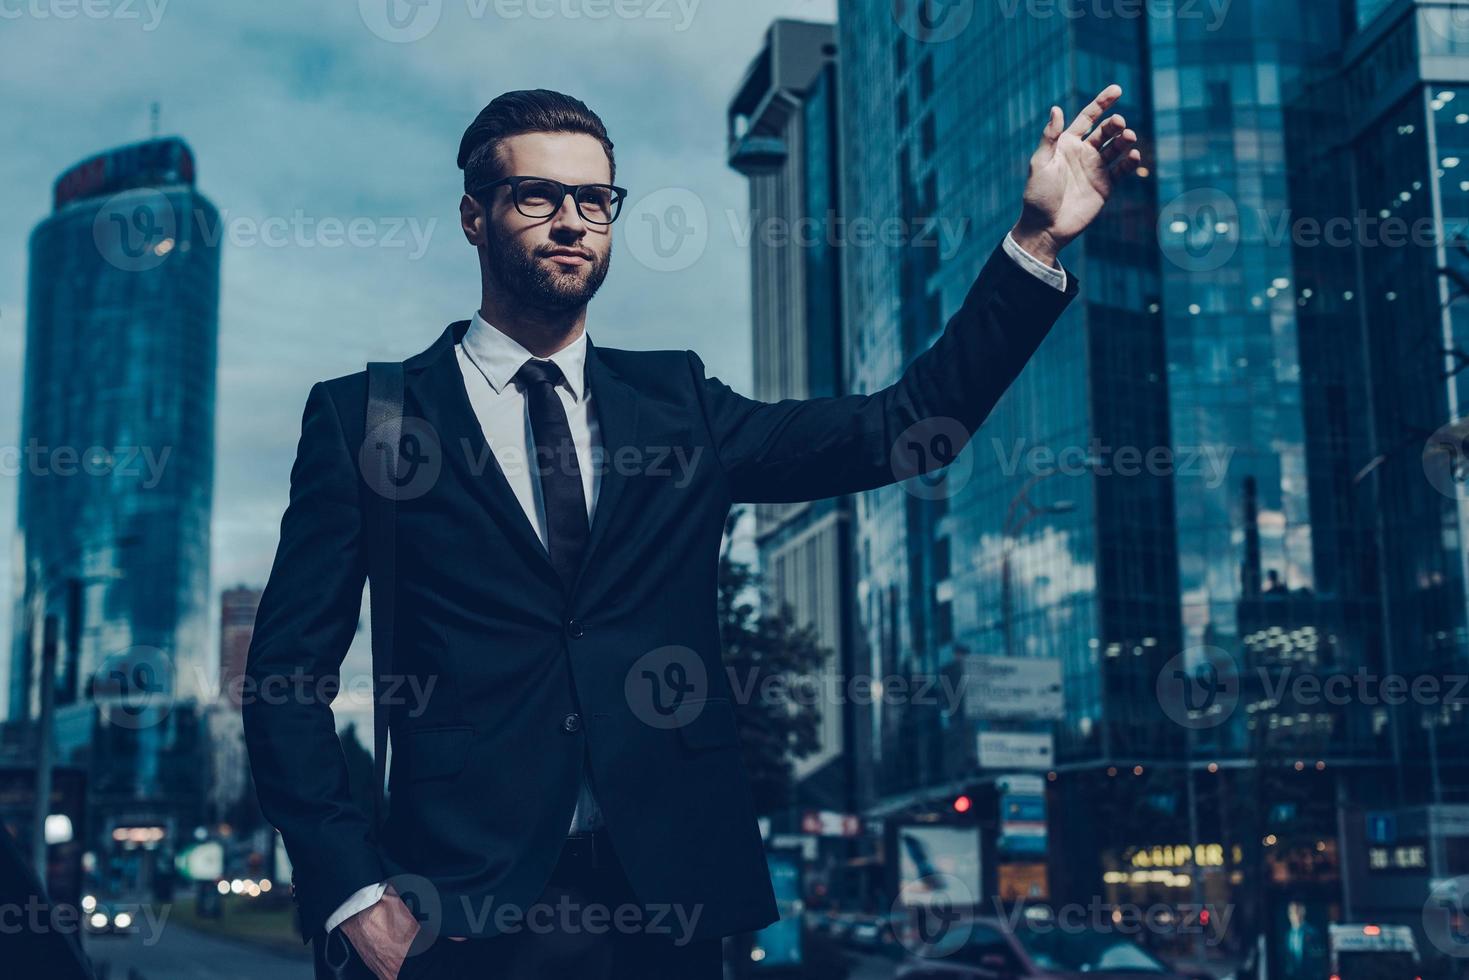 Catching taxi. Night time image of confident young businessman in full suit catching taxi while raising his arm and standing outdoors with cityscape in the background photo